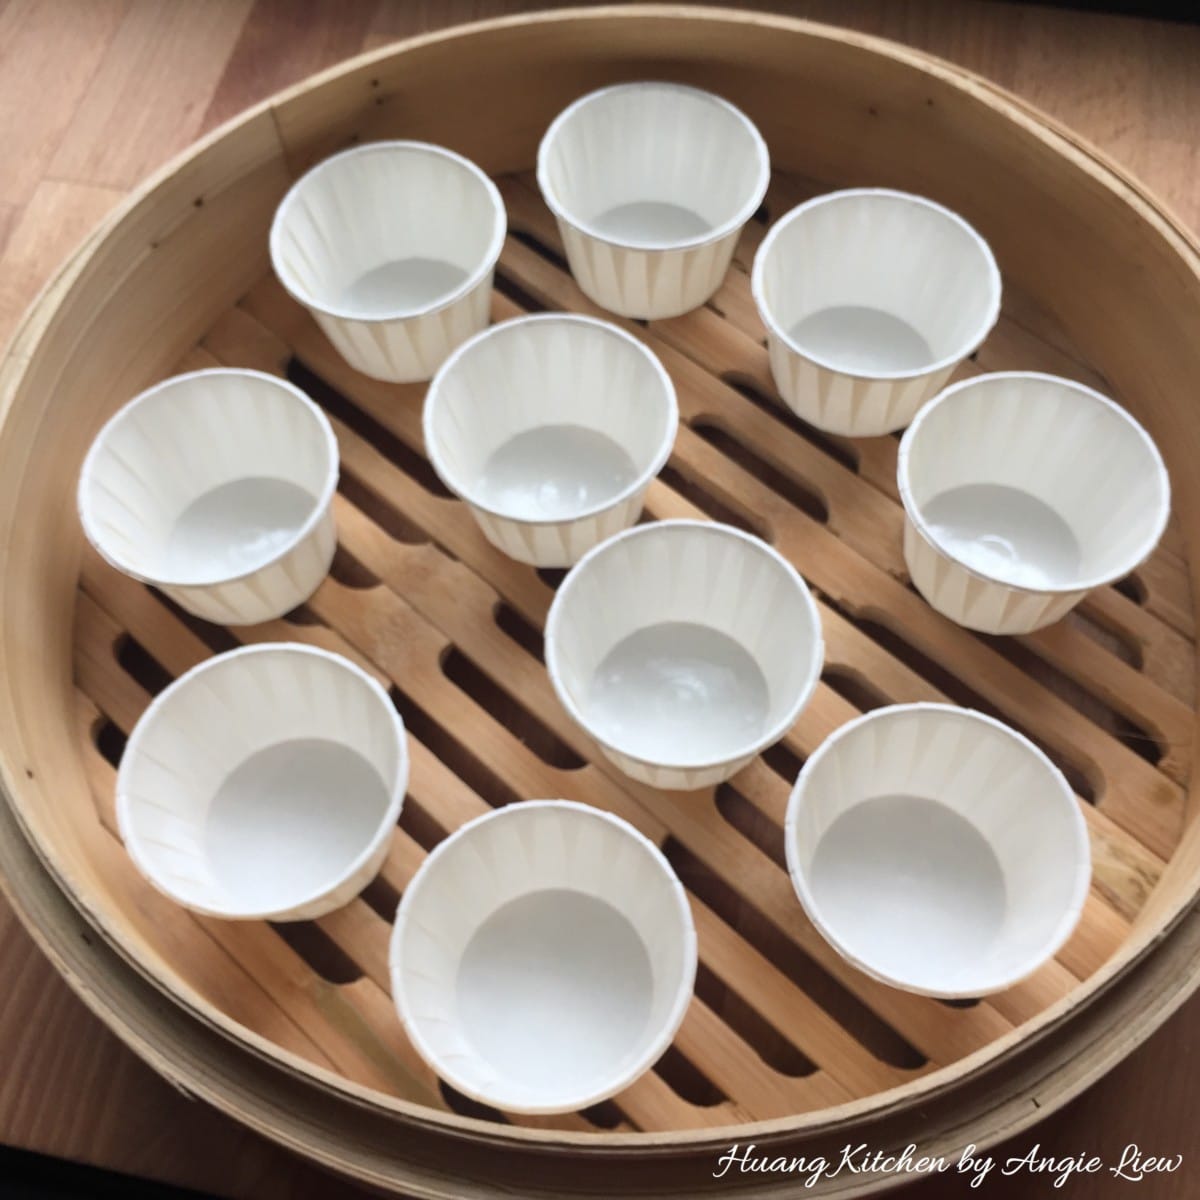 Line paper cups onto bamboo steamer.